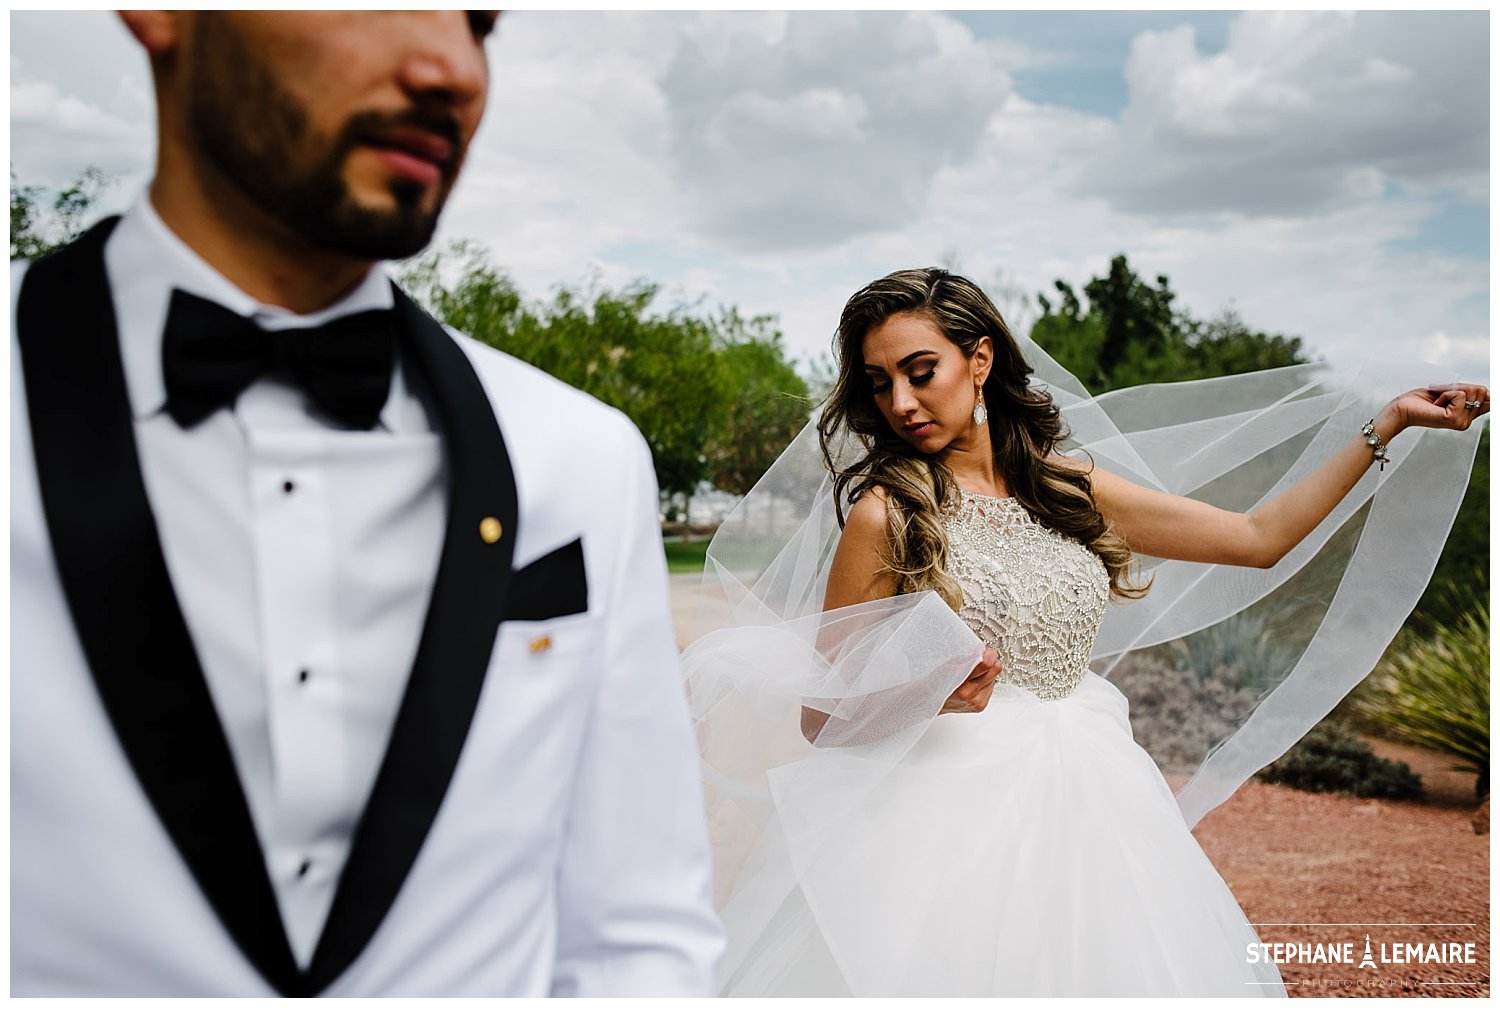 Wedding portraits in El Paso Texas by Stephane Lemaire photography